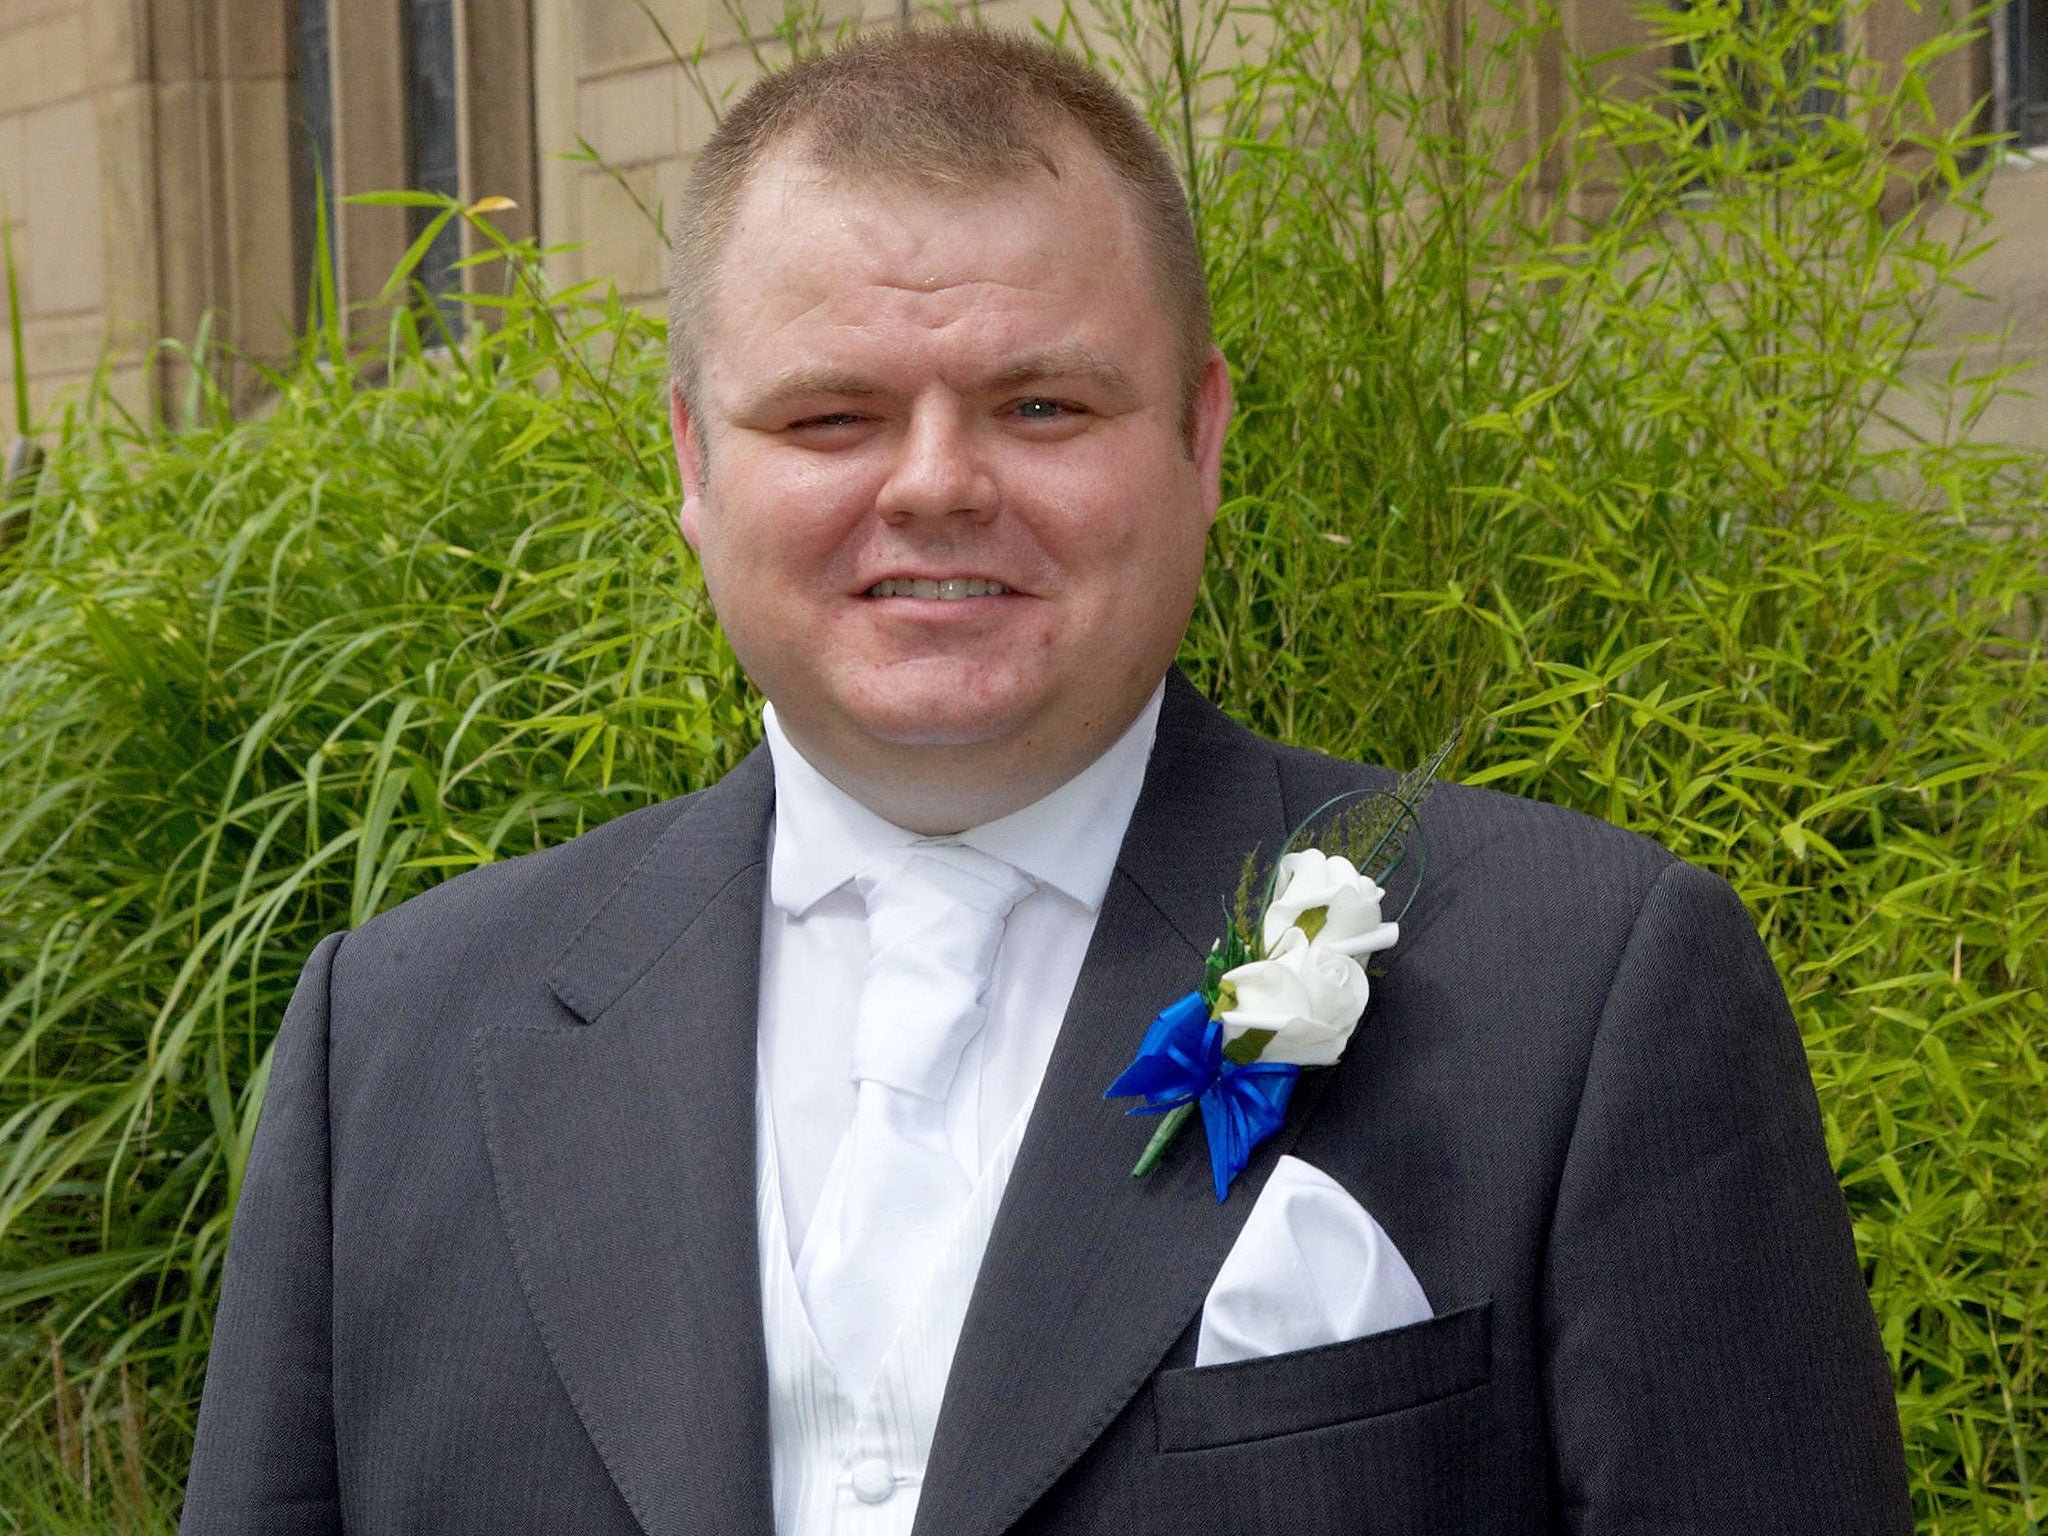 PC Neil Doyle was an officer for 10 years